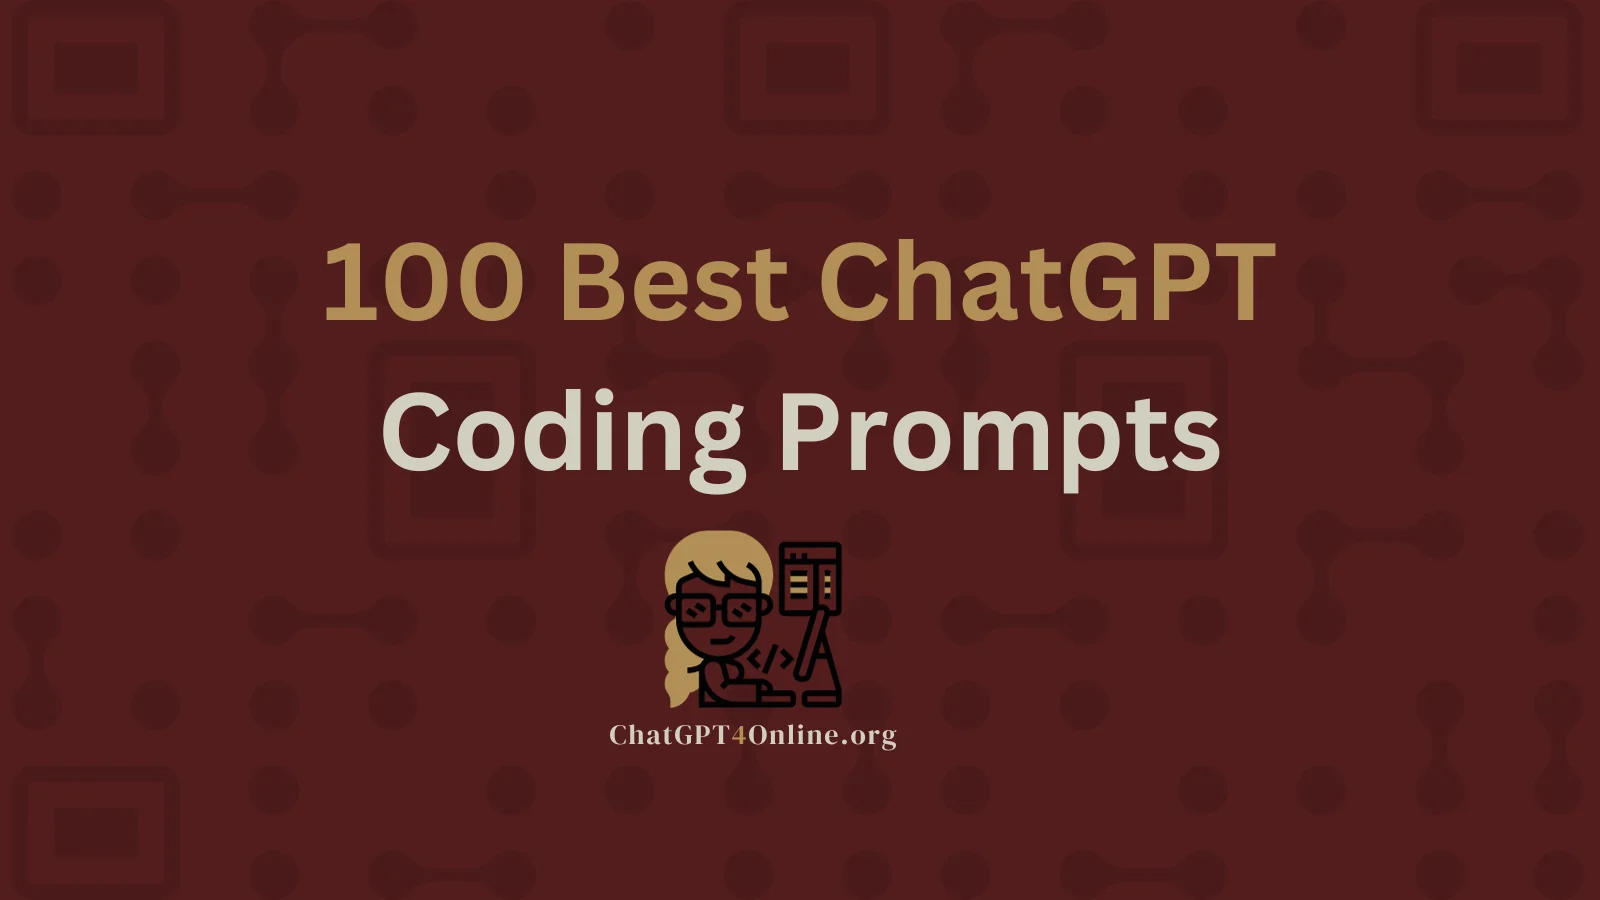 Coding Prompts: Turning ChatGPT into Your Coding Assistant